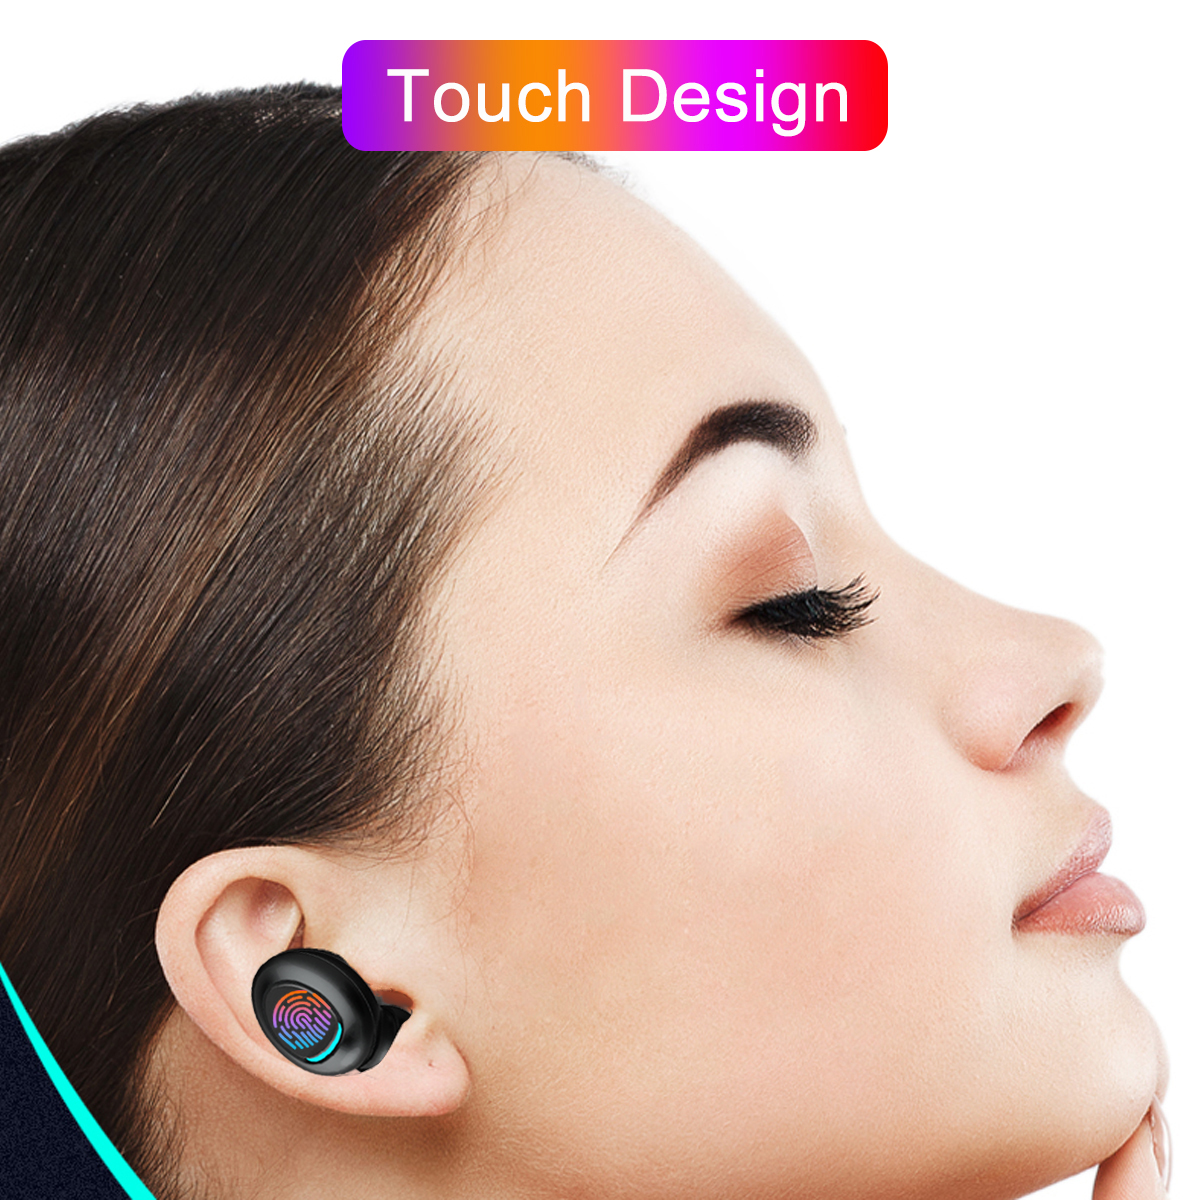 Dual-Digital-Display-True-Wireless-Headset-Button-Touch-bluetooth-50-Earphone-with-Portable-Charging-1565020-8